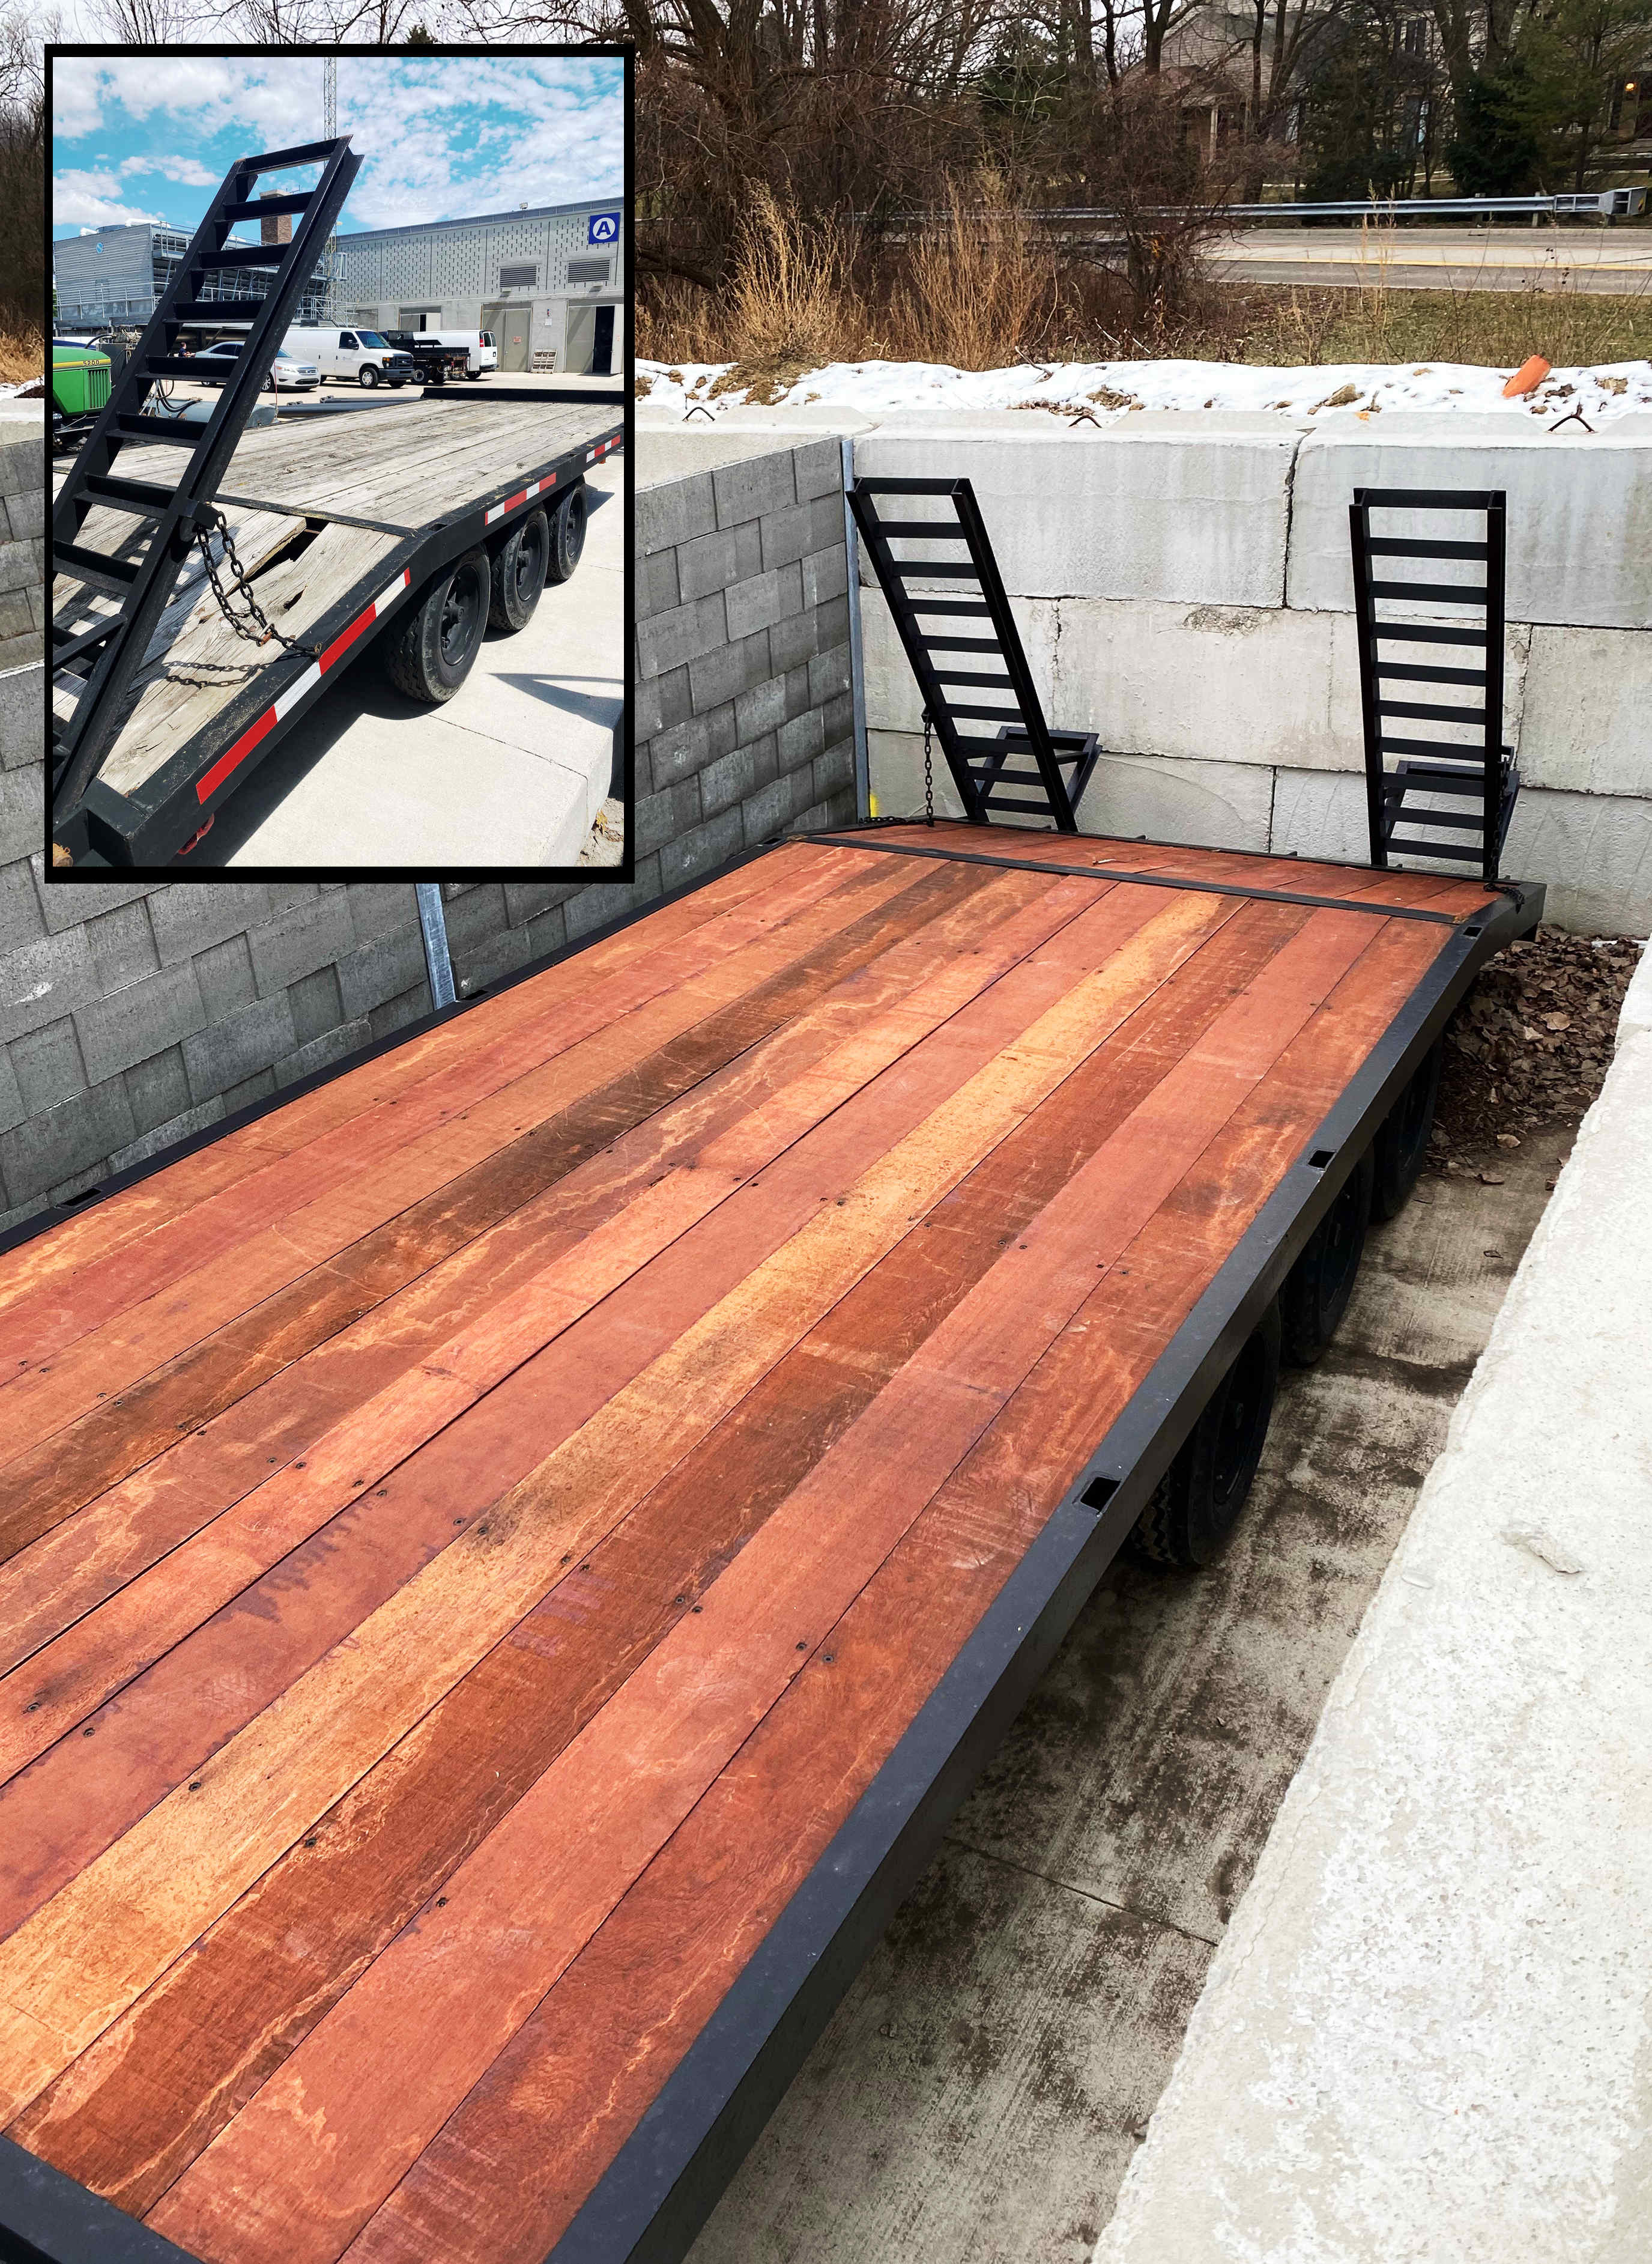 Deck over trailer refinished with Rough Sawn 6/4x8 Apitong and Apitong Oil